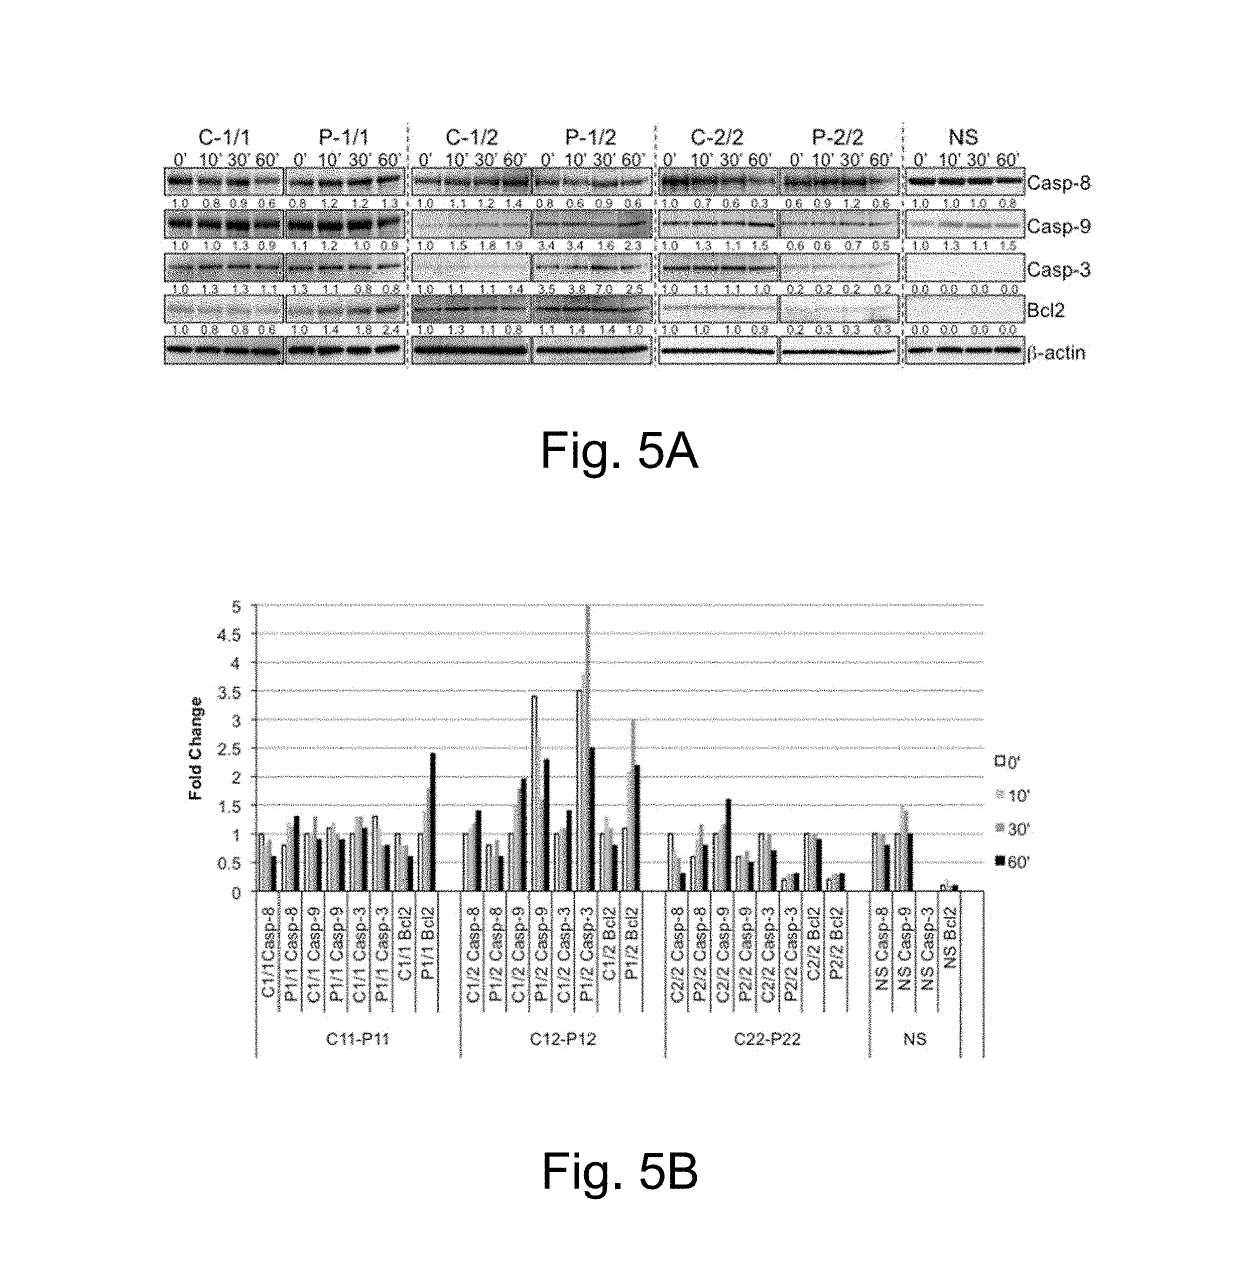 Methods of treating autoimmune conditions in patients with genetic variations in DcR3 or in a DcR3 network gene